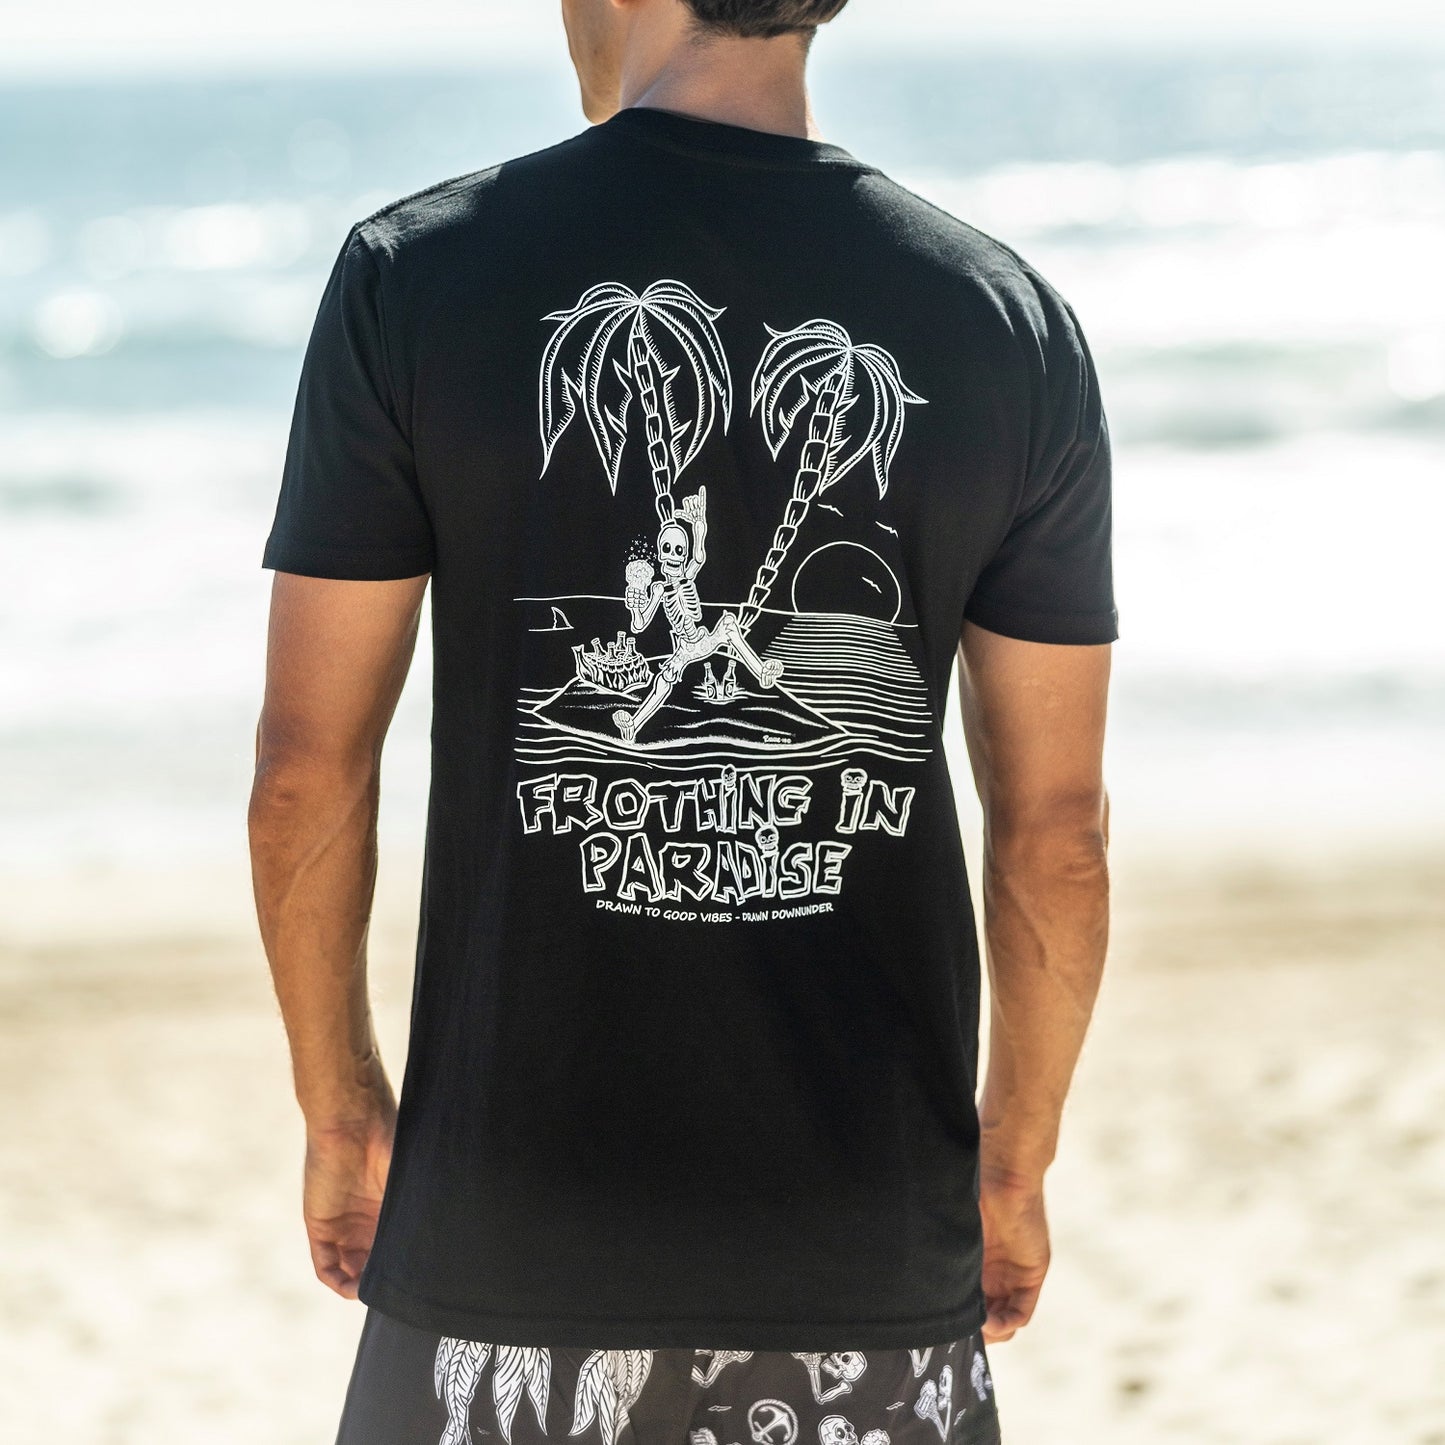 Frothing in Paradise T-Shirt